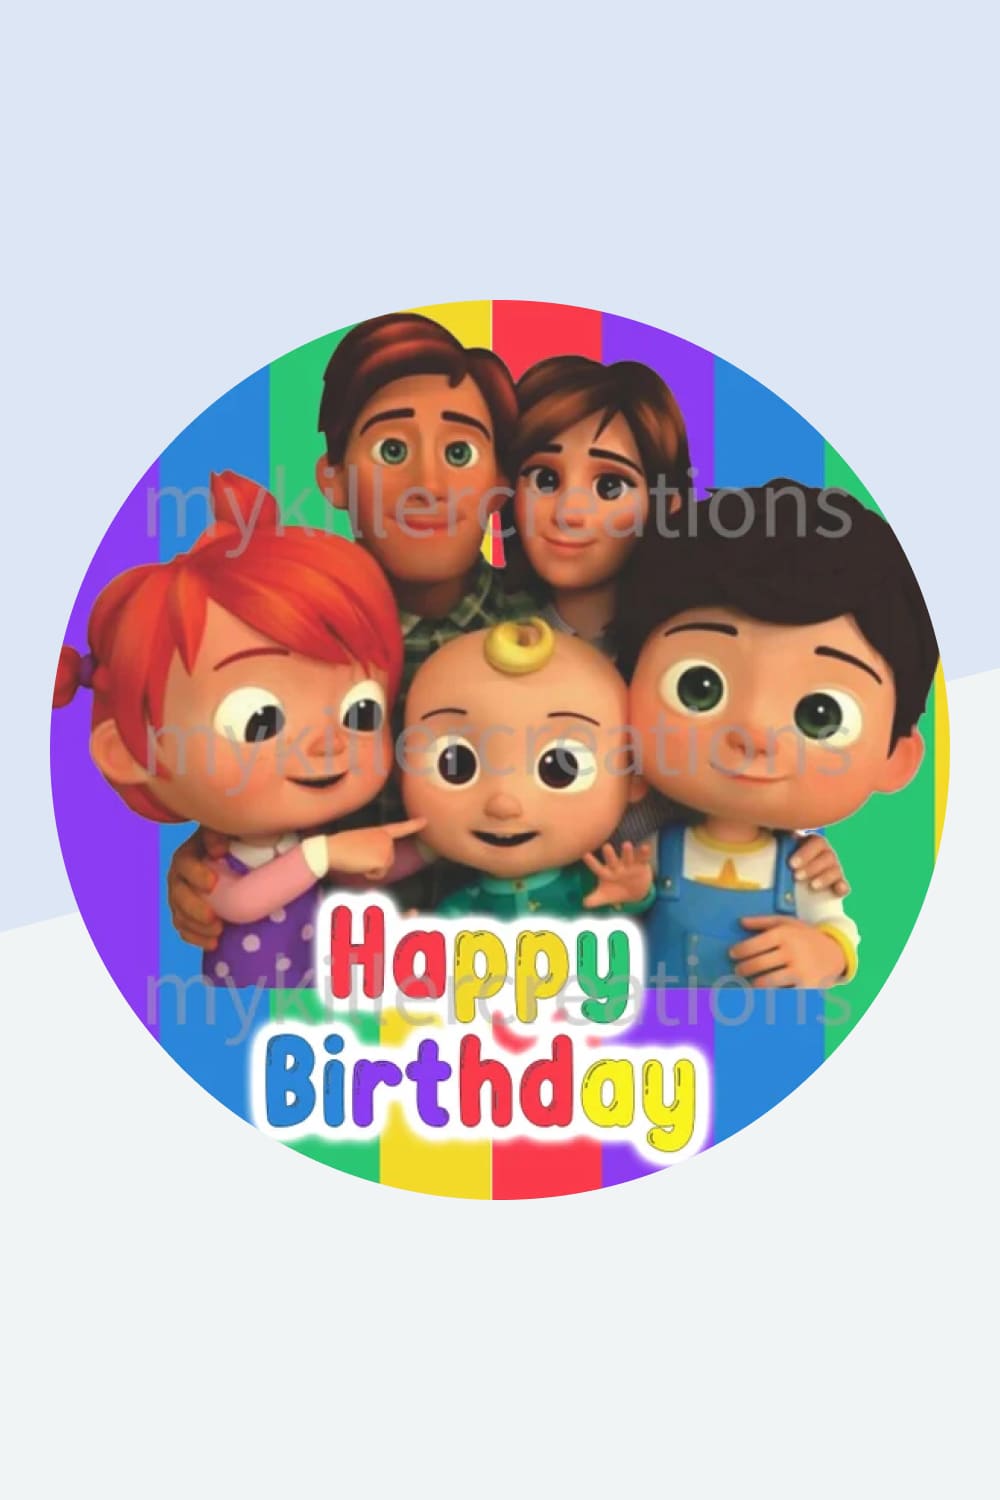 Round birthday image with Cocomelon cartoon characters.